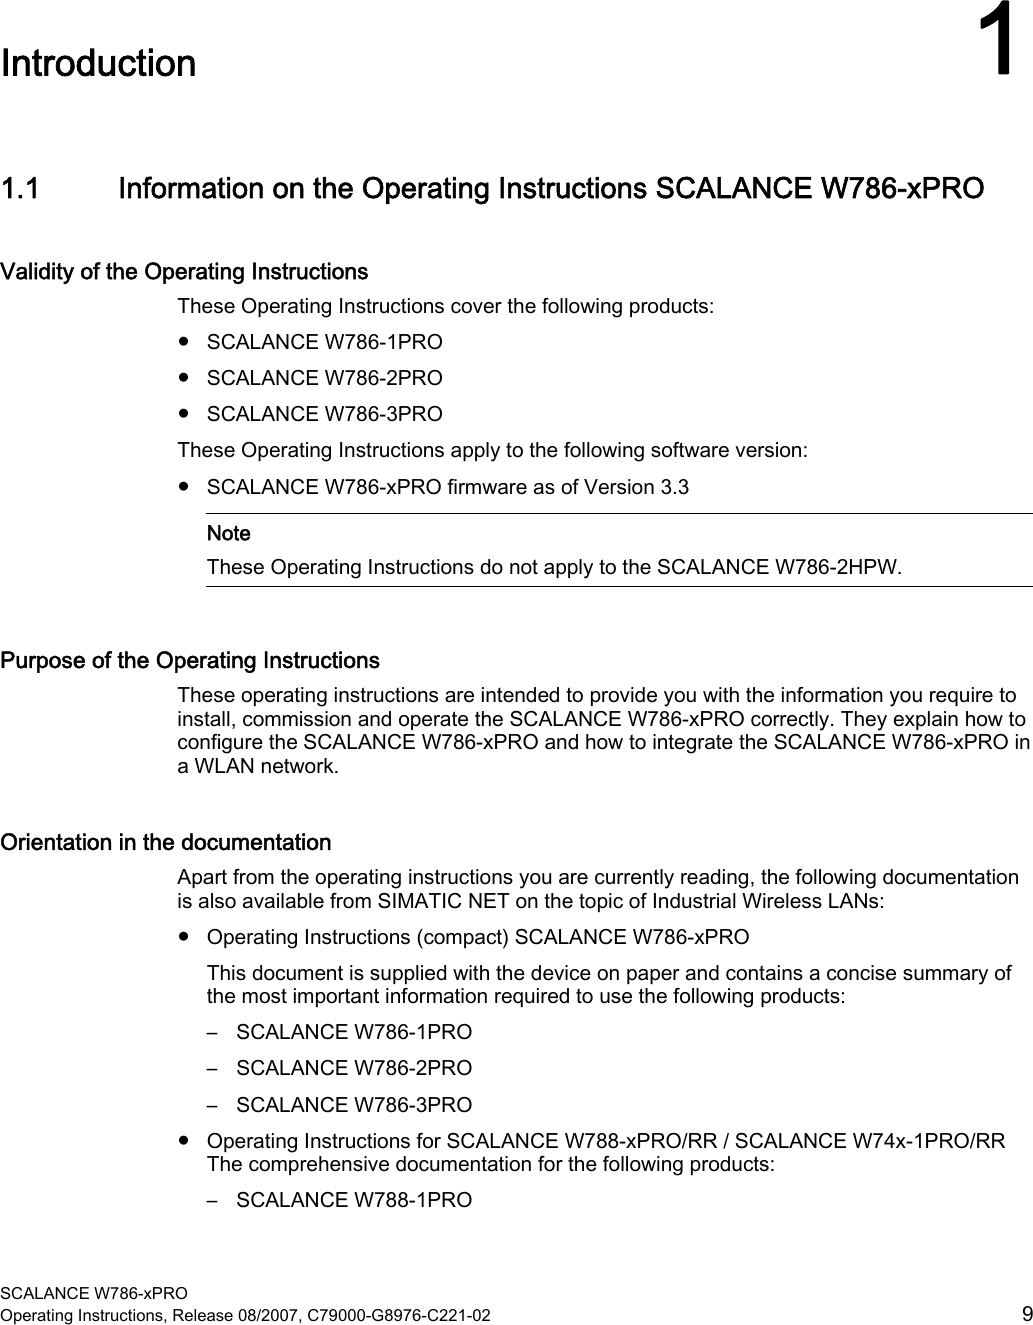  SCALANCE W786-xPRO Operating Instructions, Release 08/2007, C79000-G8976-C221-02  9 Introduction 11.1 Information on the Operating Instructions SCALANCE W786-xPRO Validity of the Operating Instructions These Operating Instructions cover the following products: ● SCALANCE W786-1PRO ● SCALANCE W786-2PRO ● SCALANCE W786-3PRO These Operating Instructions apply to the following software version: ● SCALANCE W786-xPRO firmware as of Version 3.3    Note These Operating Instructions do not apply to the SCALANCE W786-2HPW. Purpose of the Operating Instructions These operating instructions are intended to provide you with the information you require to install, commission and operate the SCALANCE W786-xPRO correctly. They explain how to configure the SCALANCE W786-xPRO and how to integrate the SCALANCE W786-xPRO in a WLAN network. Orientation in the documentation Apart from the operating instructions you are currently reading, the following documentation is also available from SIMATIC NET on the topic of Industrial Wireless LANs: ● Operating Instructions (compact) SCALANCE W786-xPRO This document is supplied with the device on paper and contains a concise summary of the most important information required to use the following products: – SCALANCE W786-1PRO – SCALANCE W786-2PRO – SCALANCE W786-3PRO ● Operating Instructions for SCALANCE W788-xPRO/RR / SCALANCE W74x-1PRO/RR The comprehensive documentation for the following products: – SCALANCE W788-1PRO 